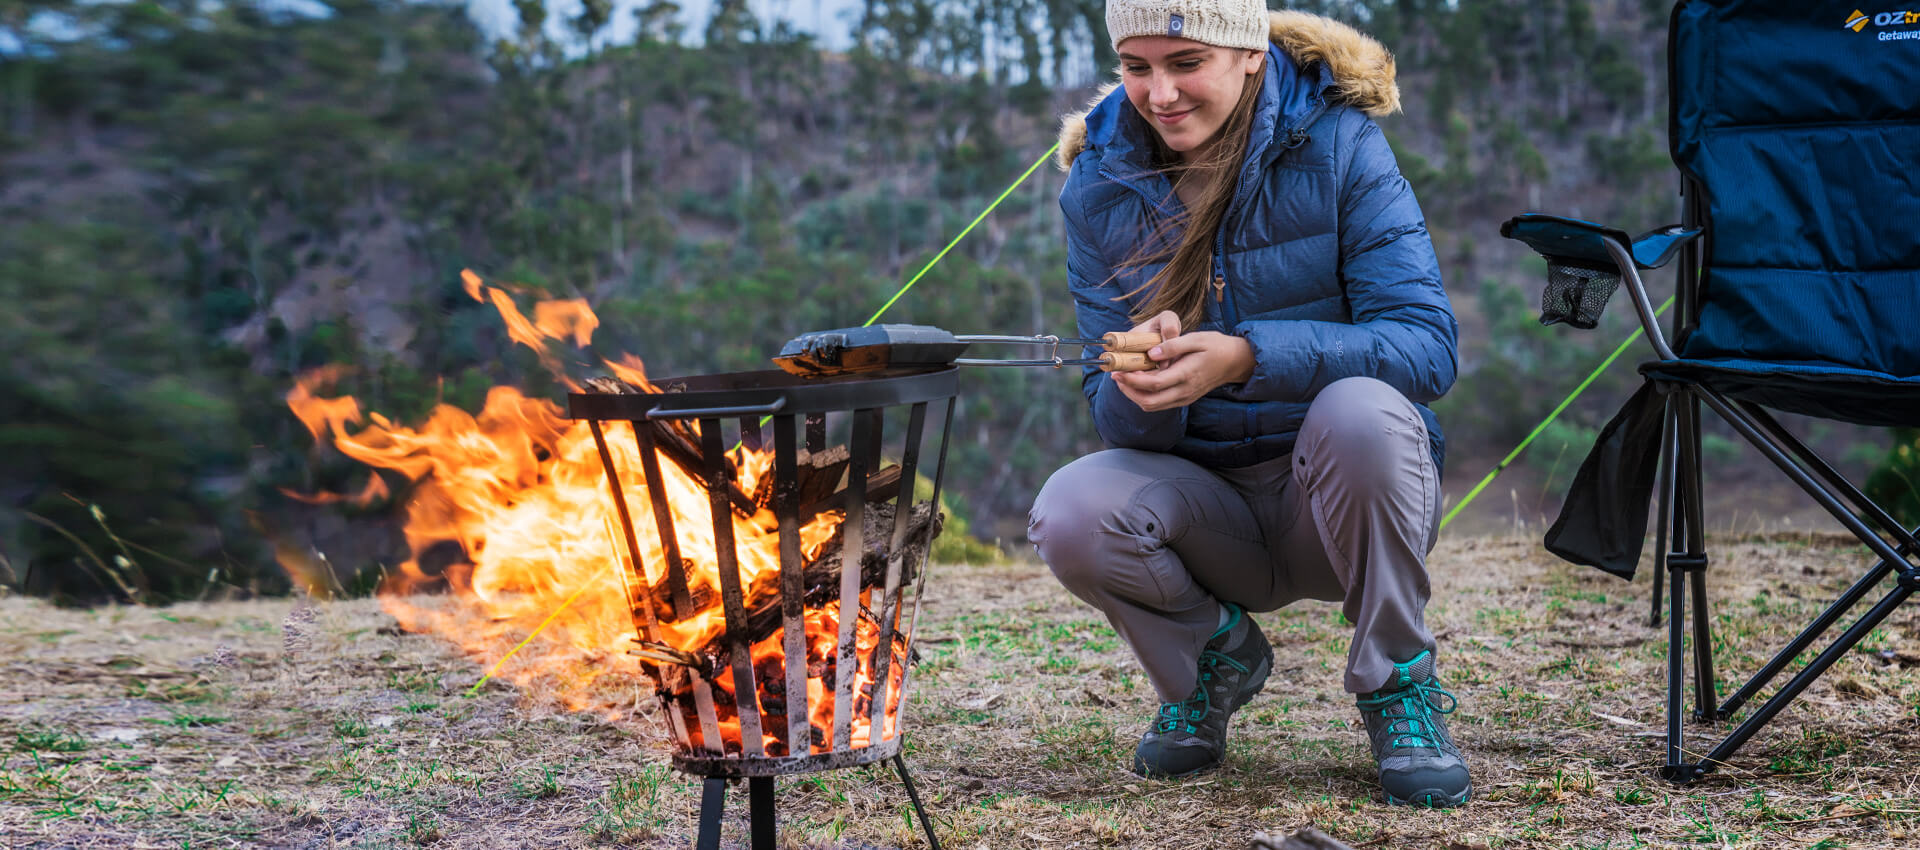 Stay warm and cook a hearty meal with a contained campfire